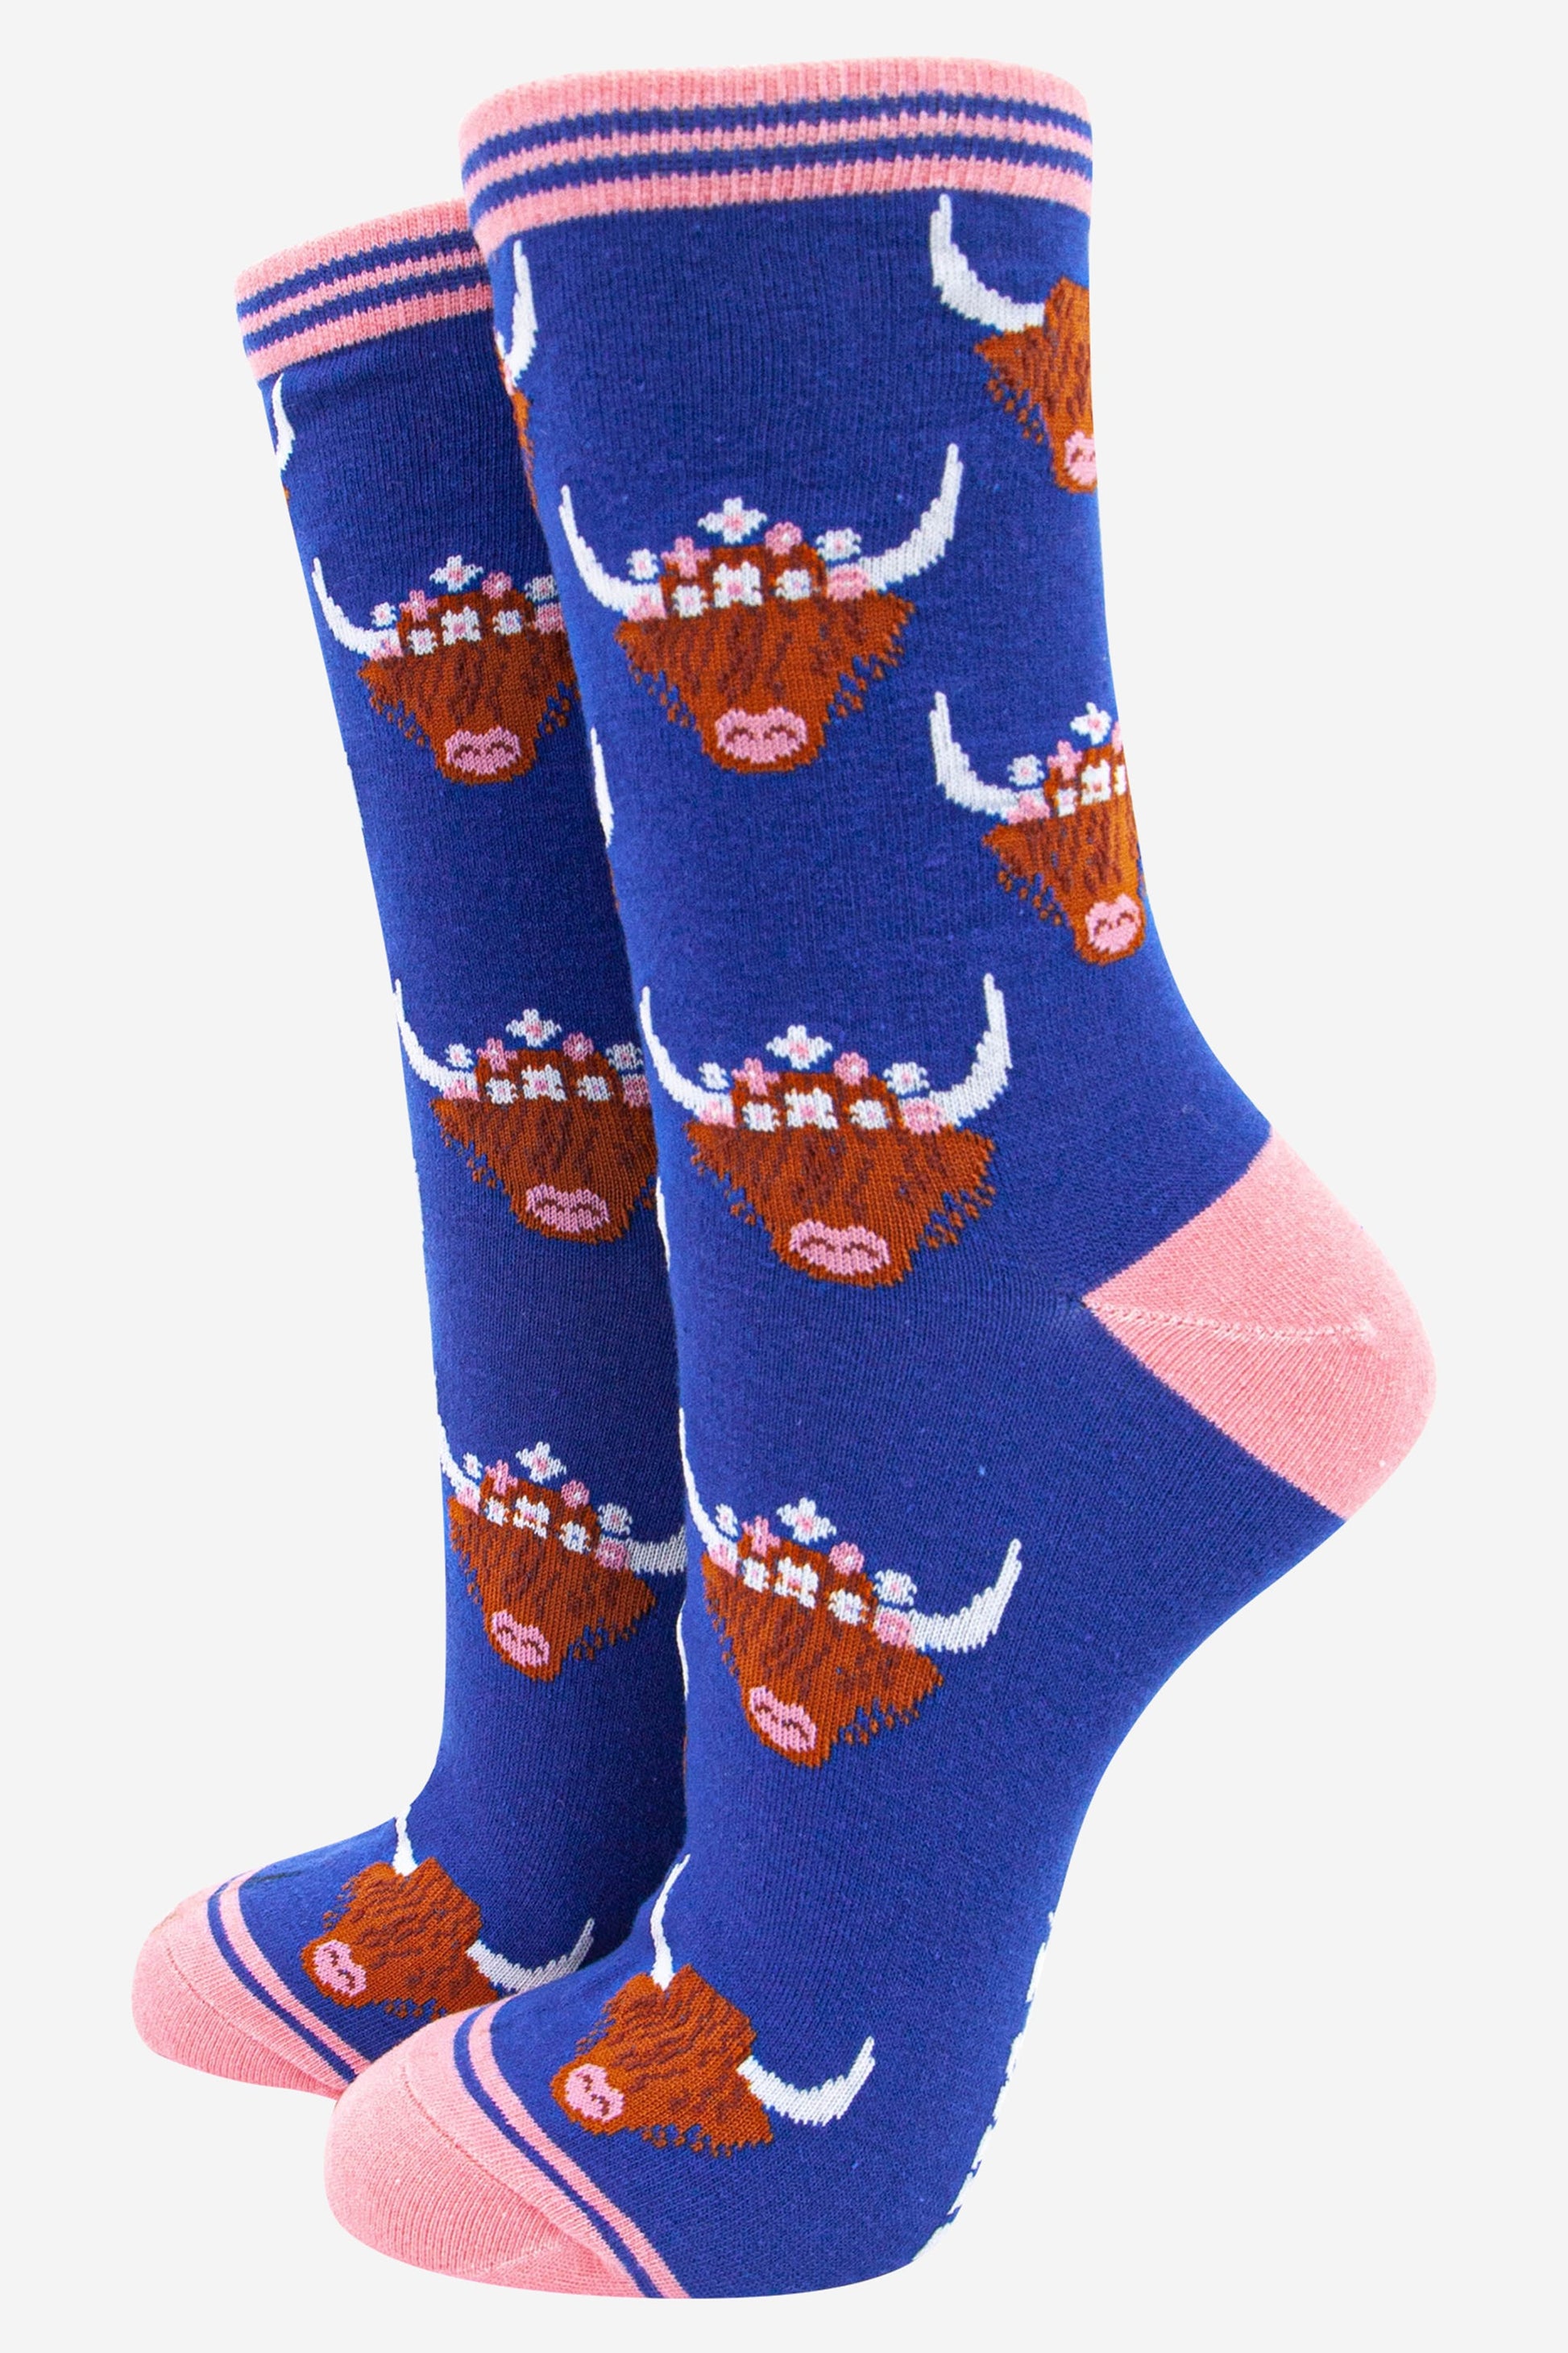 blue bamboo socks with pink heel, toe and trim with an all over pattern of brown highland cow faces with horns the cows are wearing floral wreaths as crowns